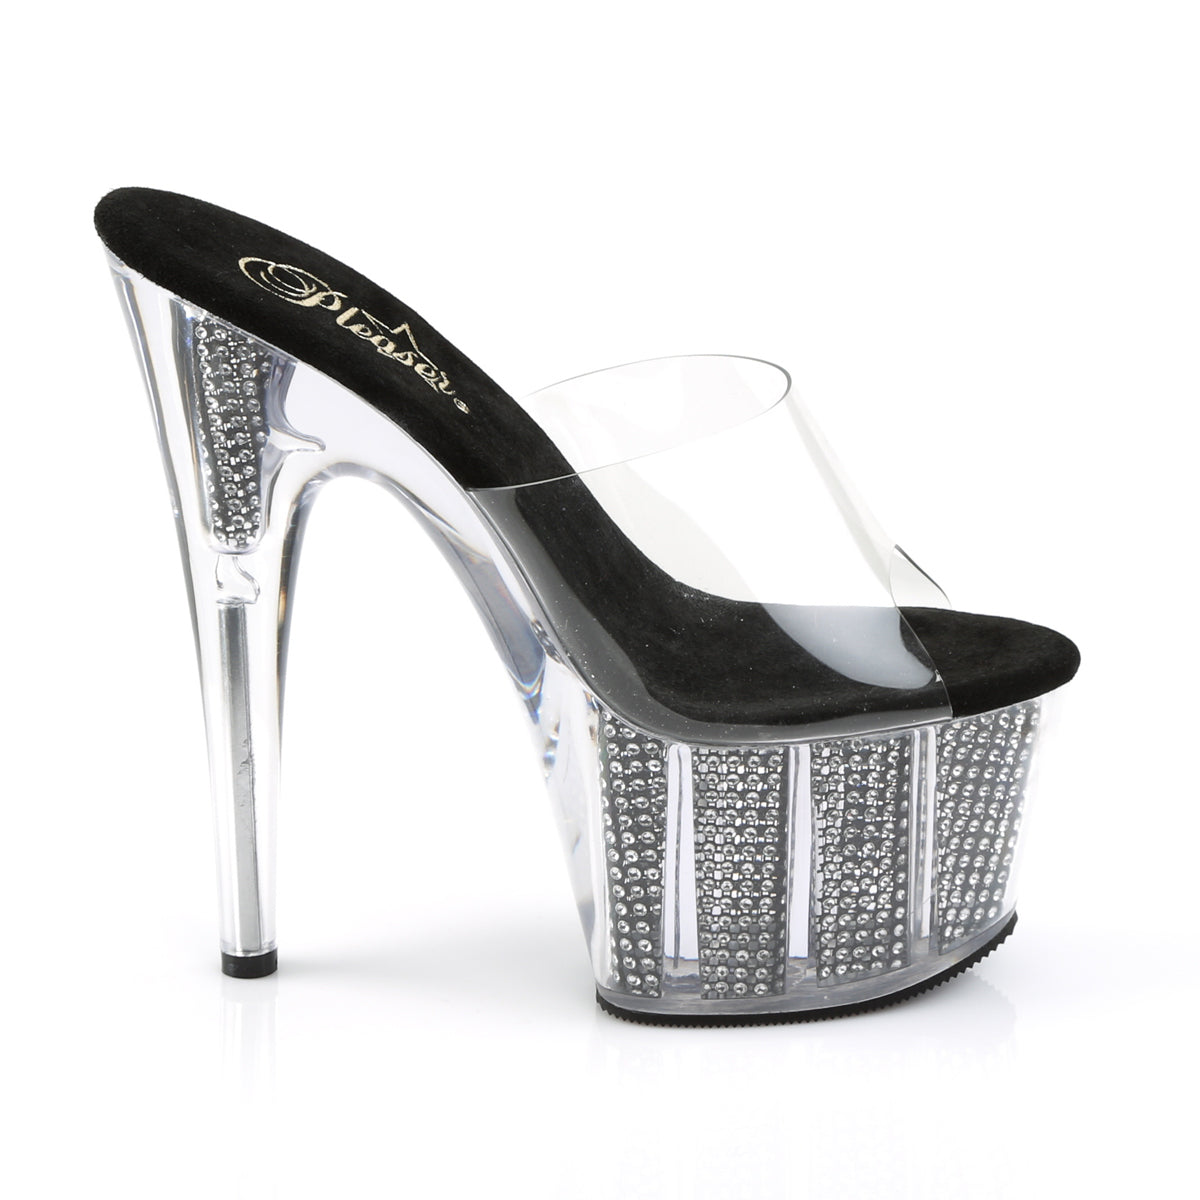 ADORE-701SRS 7" Heel Clear Black Bling Strippers Sandals-Pleaser- Sexy Shoes Fetish Heels